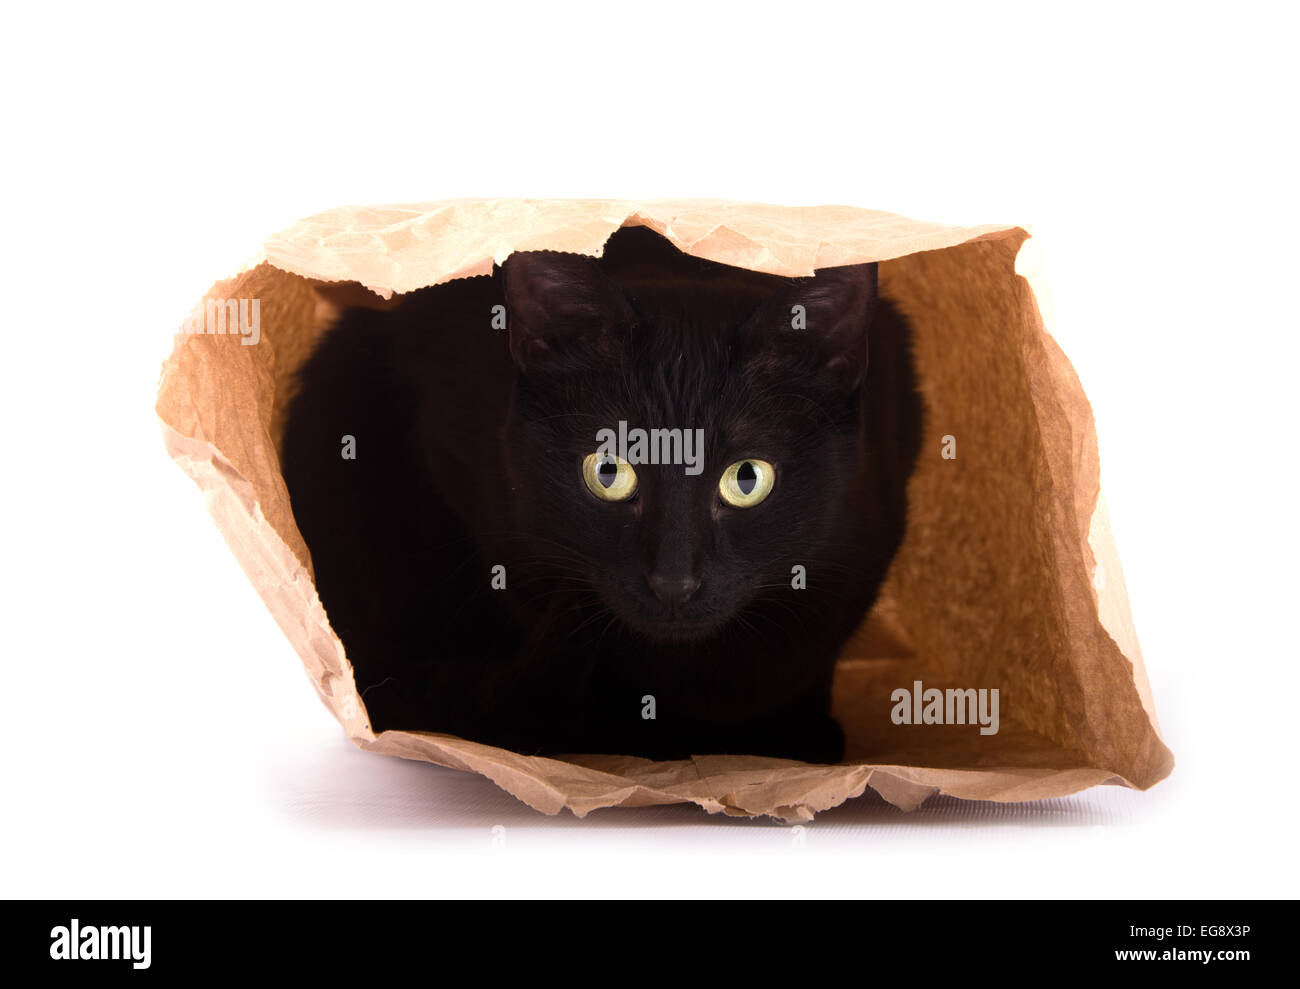 Playful black cat hiding in a brown paper bag, on white Stock Photo